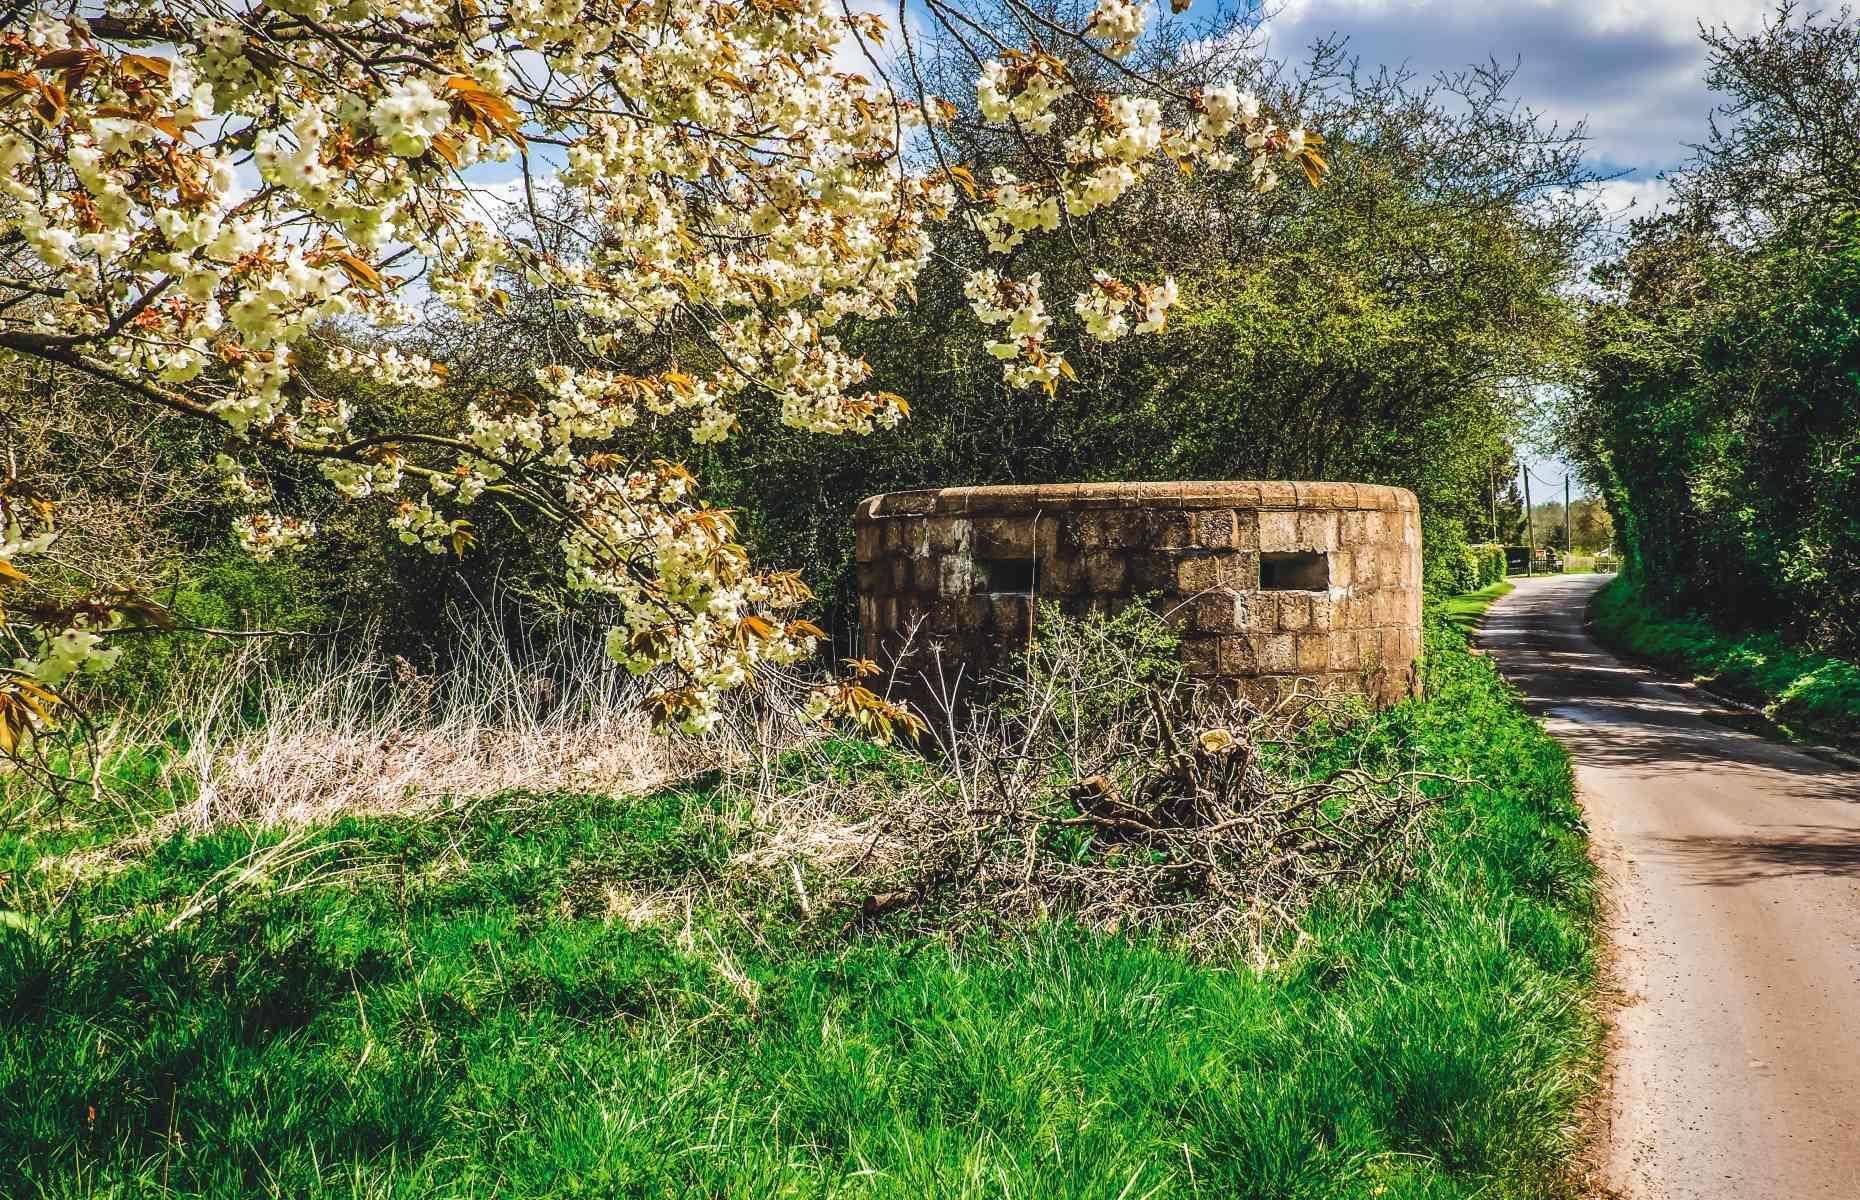 These Abandoned First World War Sites Will Give You The Chills